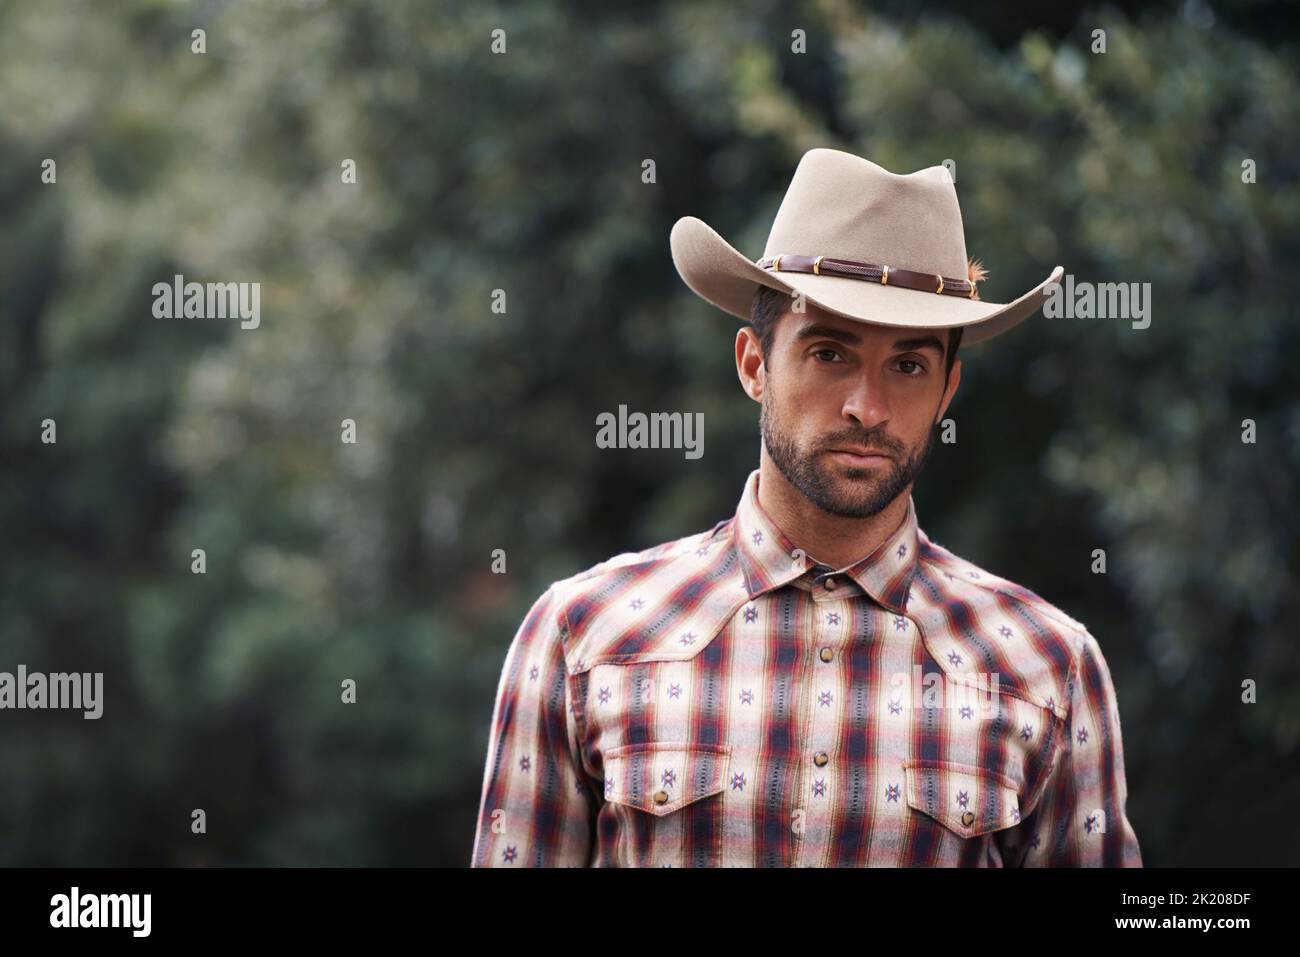 Style will never be plaid out. Portrait of a handsome man wearing a check shirt and cowboy hat. Stock Photo